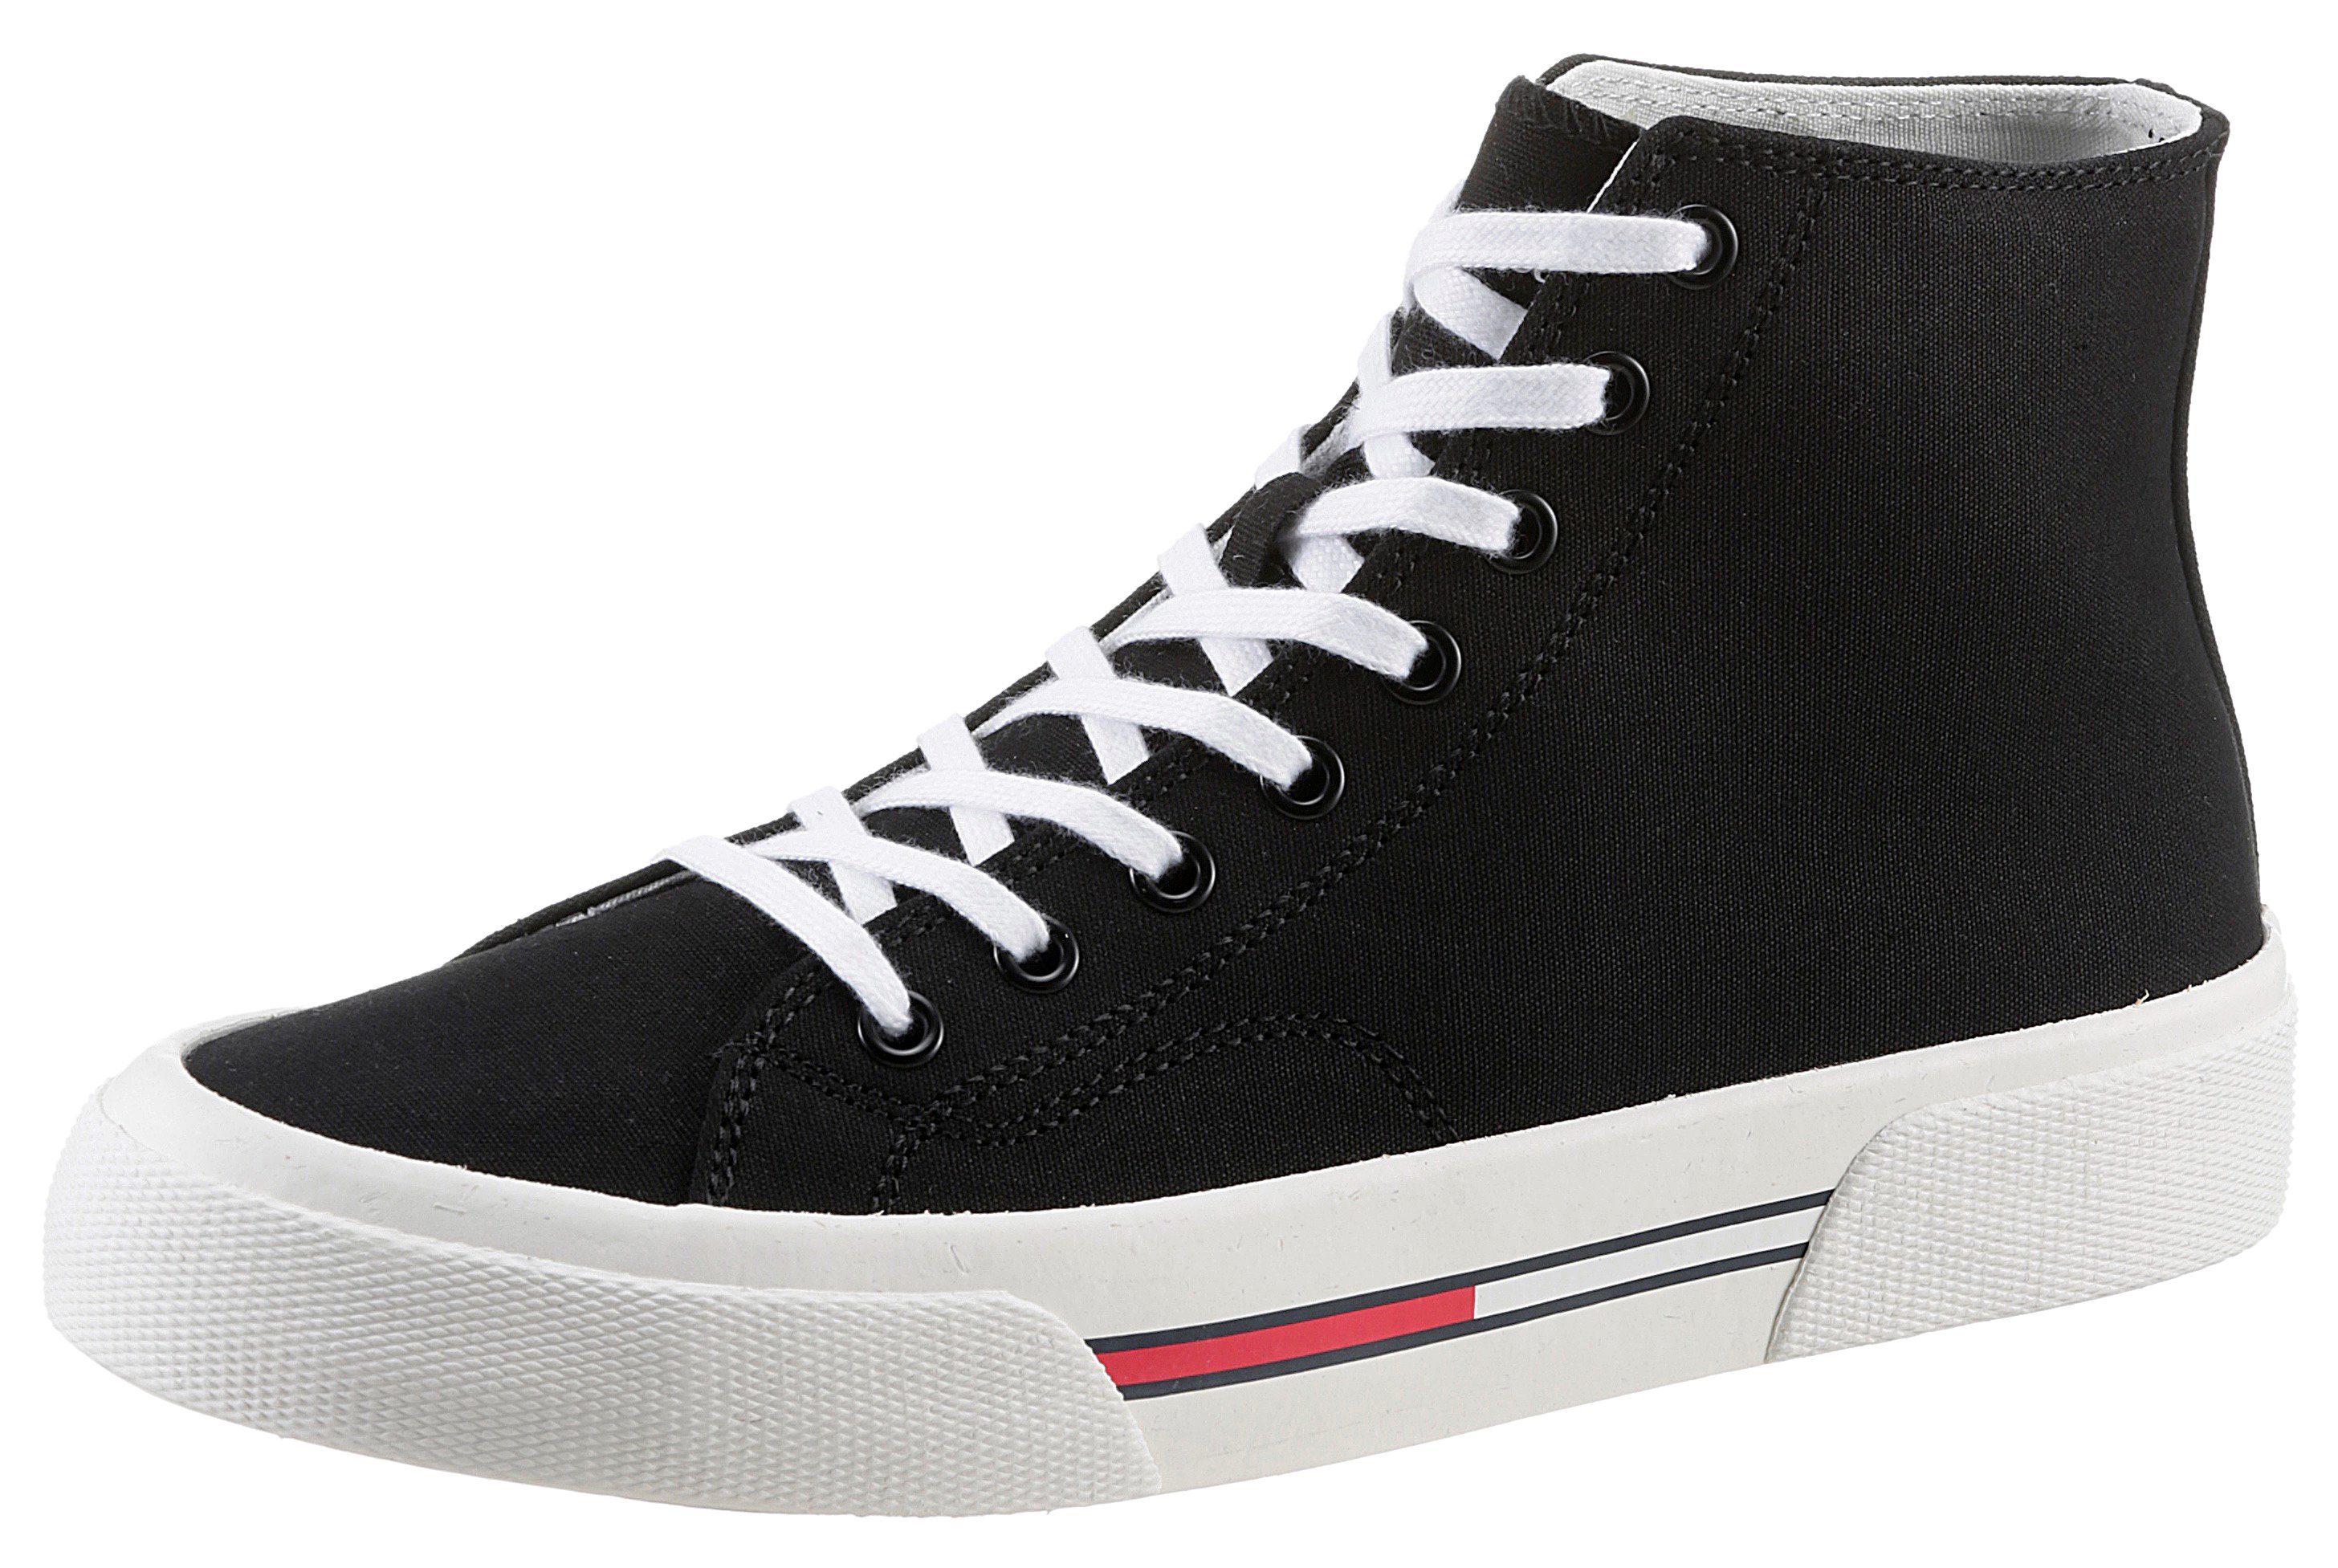 Tommy Jeans TOMMY JEANS MID CANVAS COLOR Sneaker mit Used-Laufsohle mit Bio-Material-Anteil, Freizeitschuh, Halbschuh